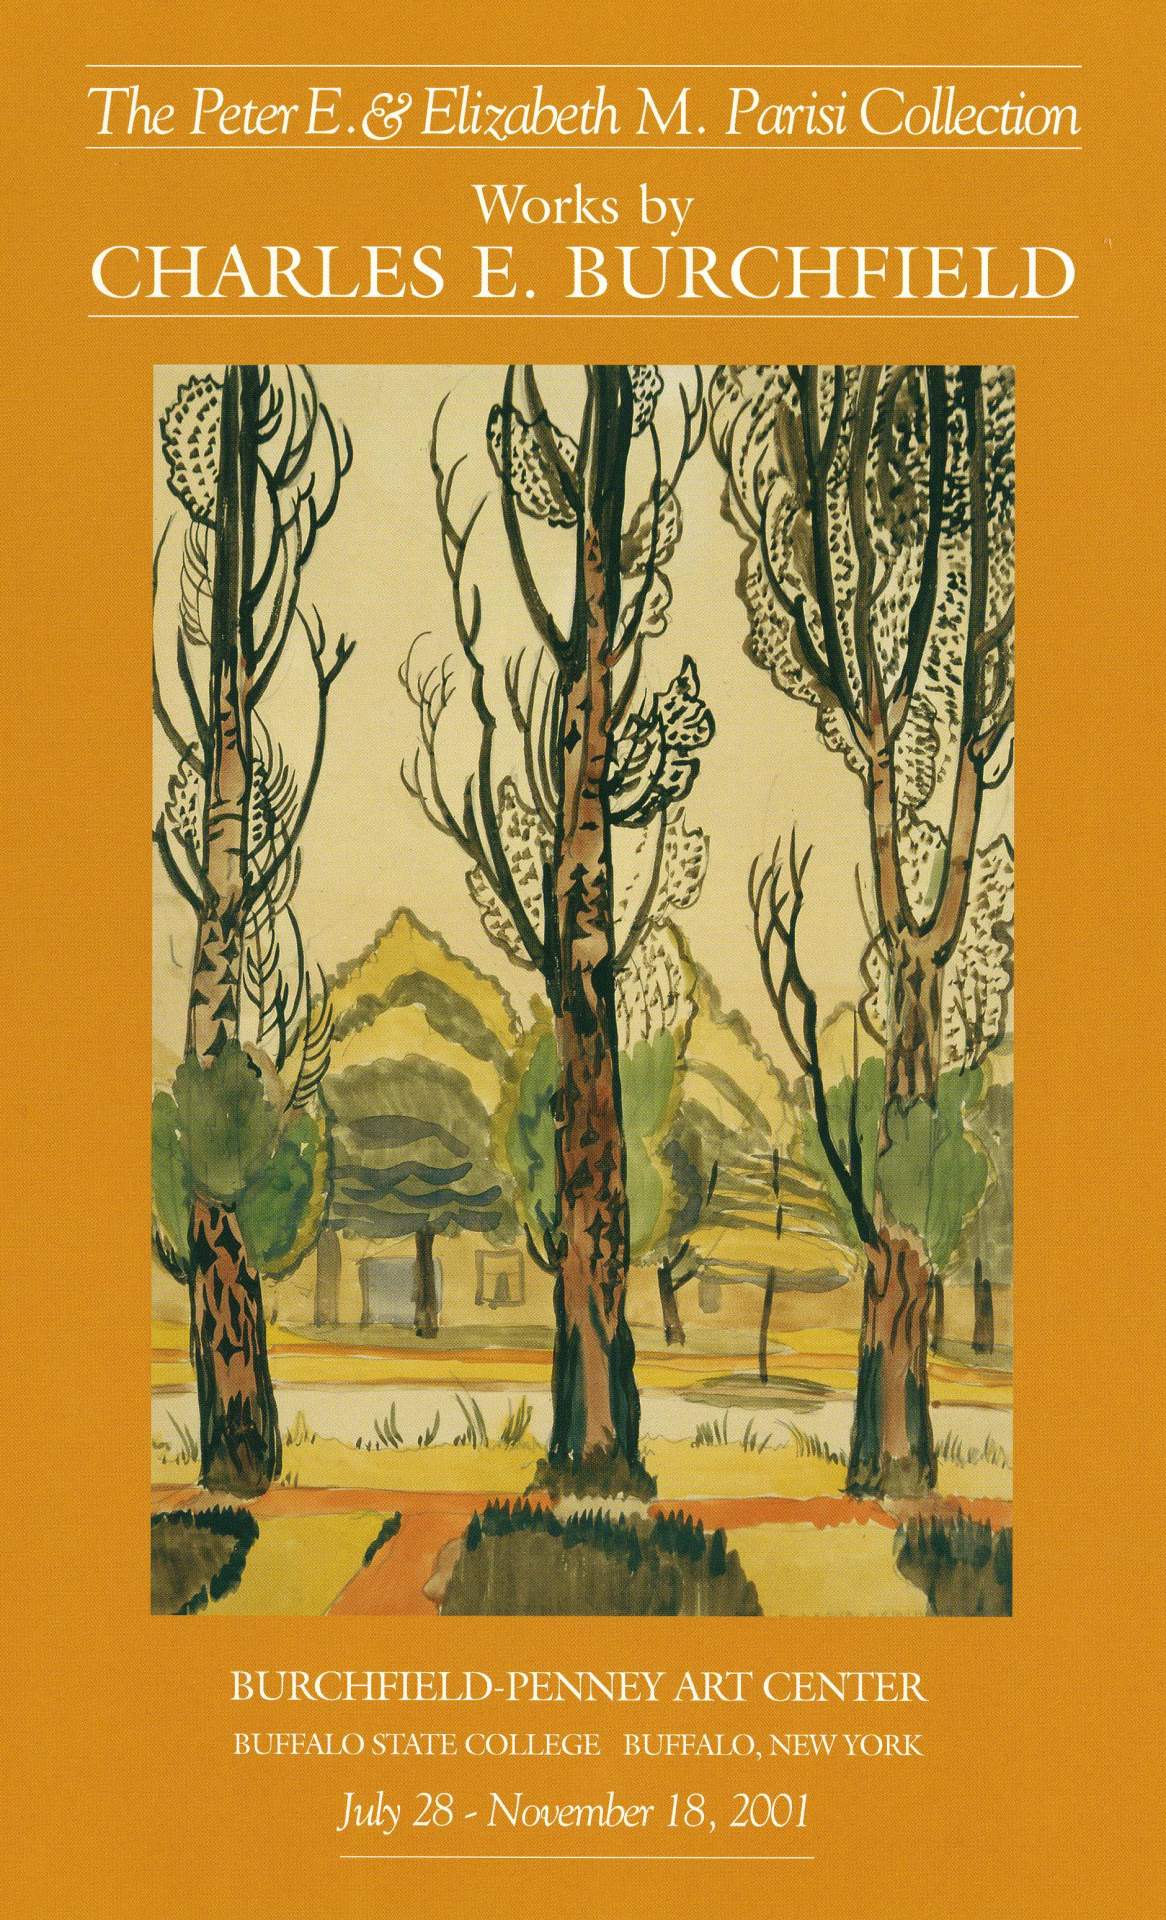 The Peter E. & Elizabeth M. Parisi Collection of Works by Charles E. Burchfield